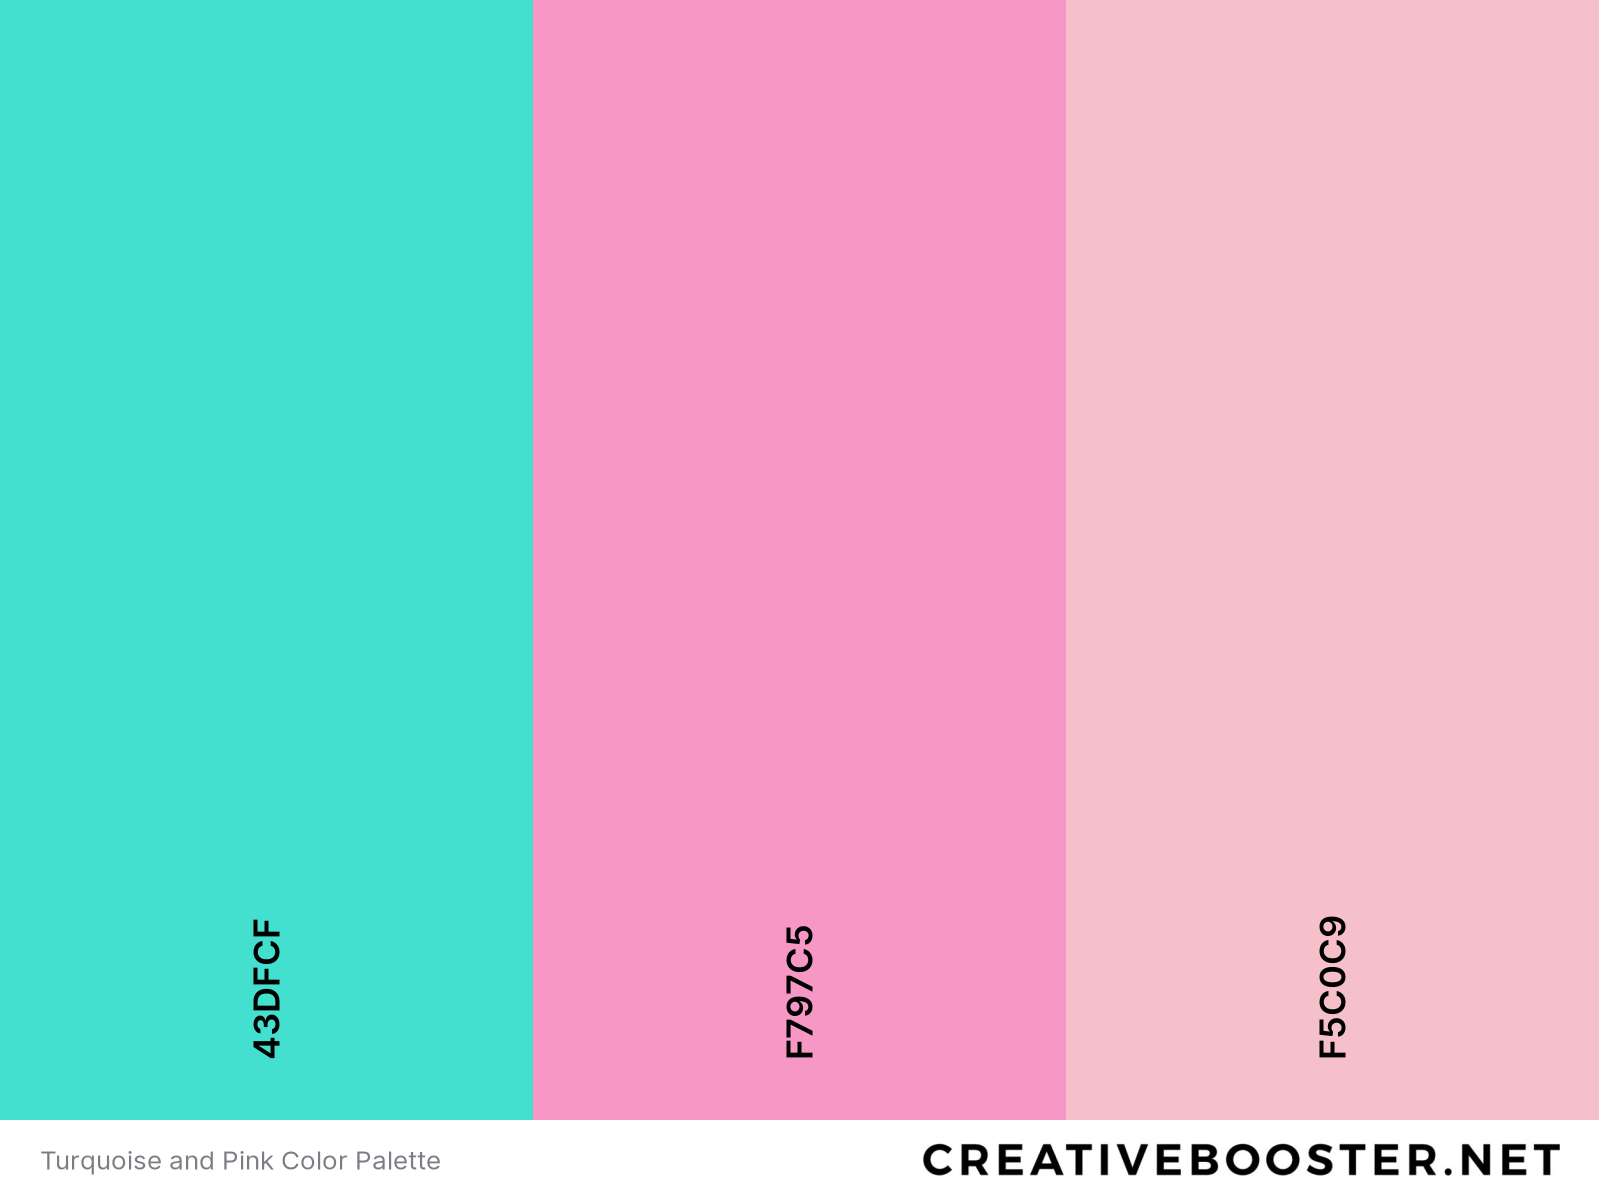 Turquoise and Pink Color Palette